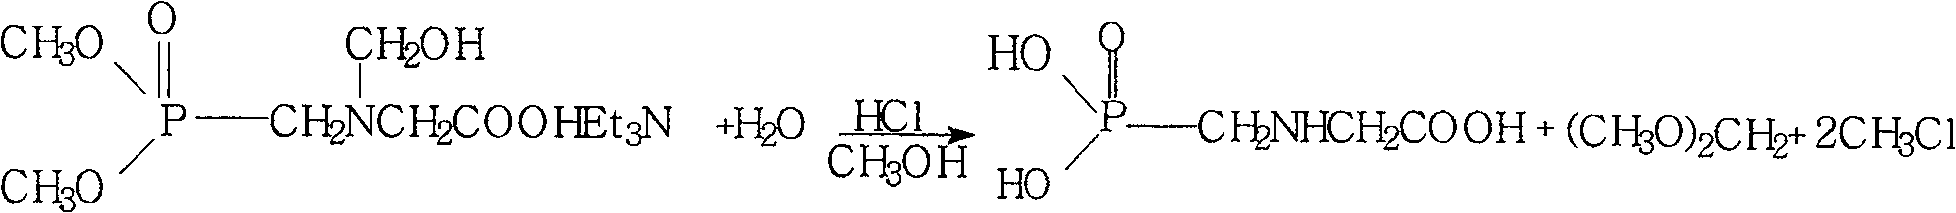 Continuous synthesis of glyphosate by dimethyl ester